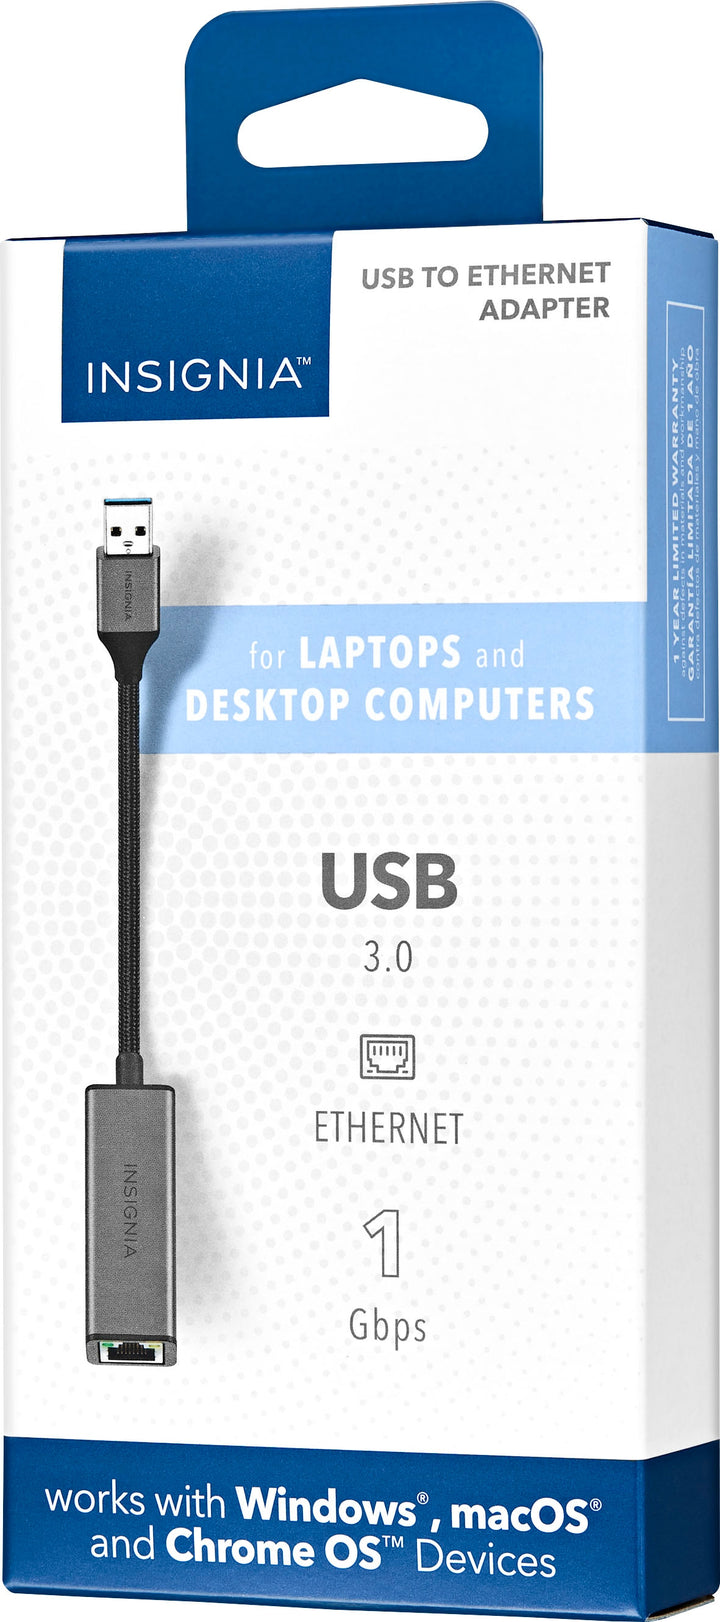 Insignia™ - USB to Ethernet Adapter - Black_6